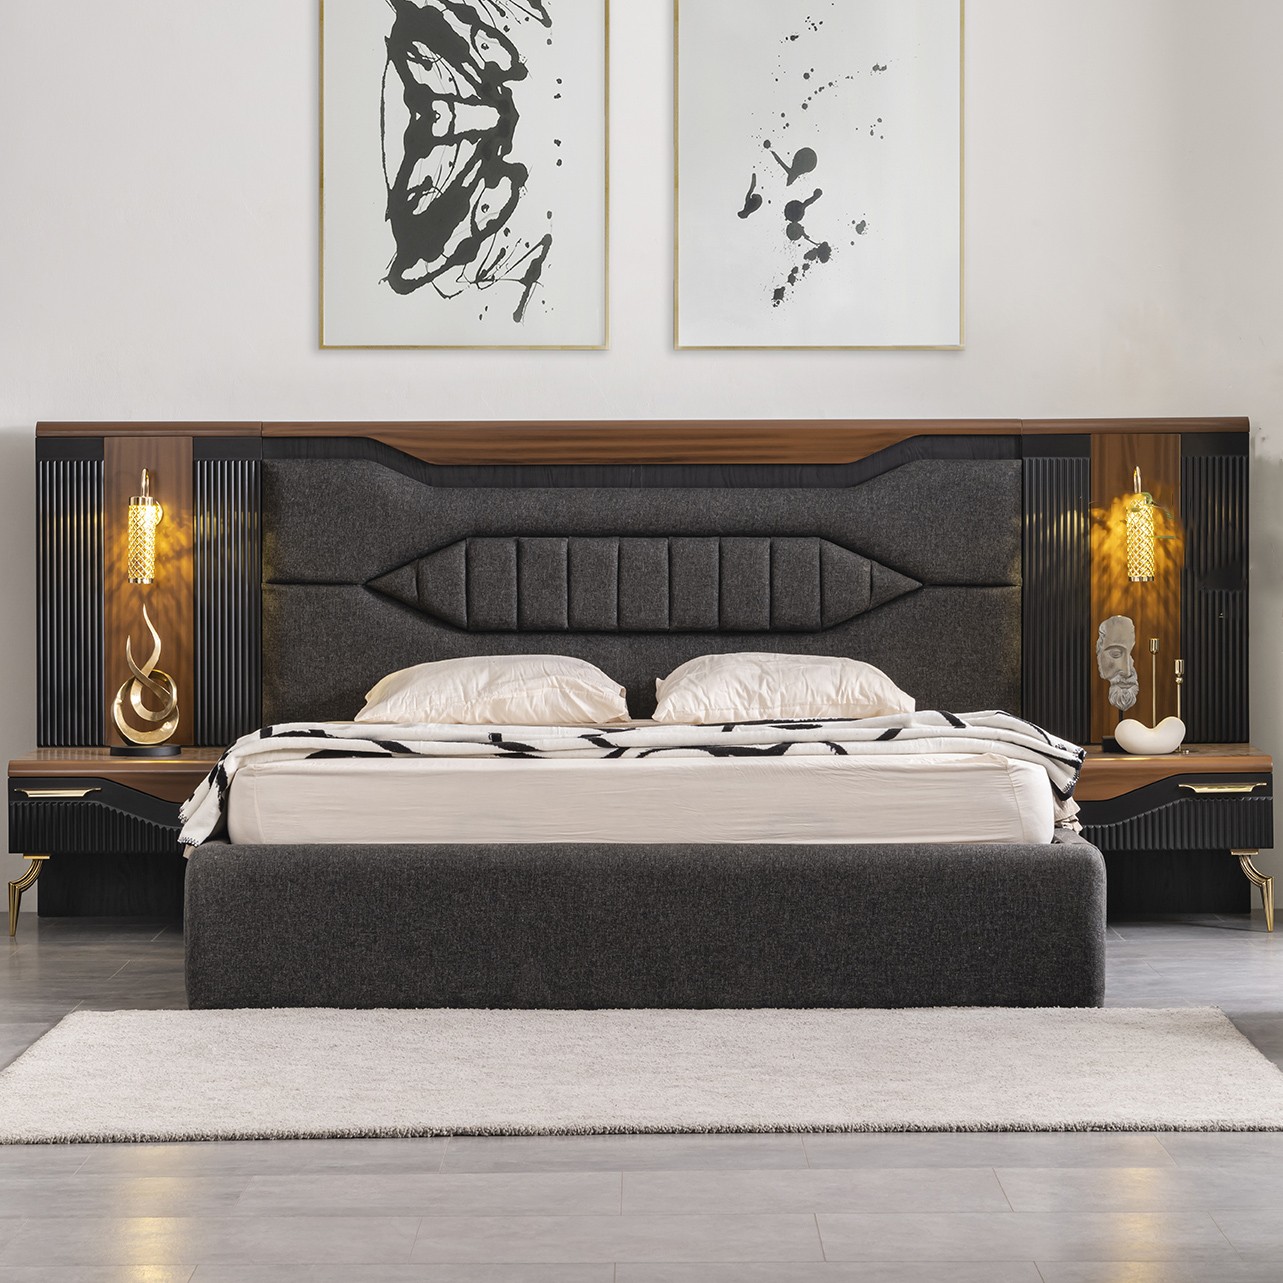 Style Hermes Vol2 Bed Without Storage 180x200 cm